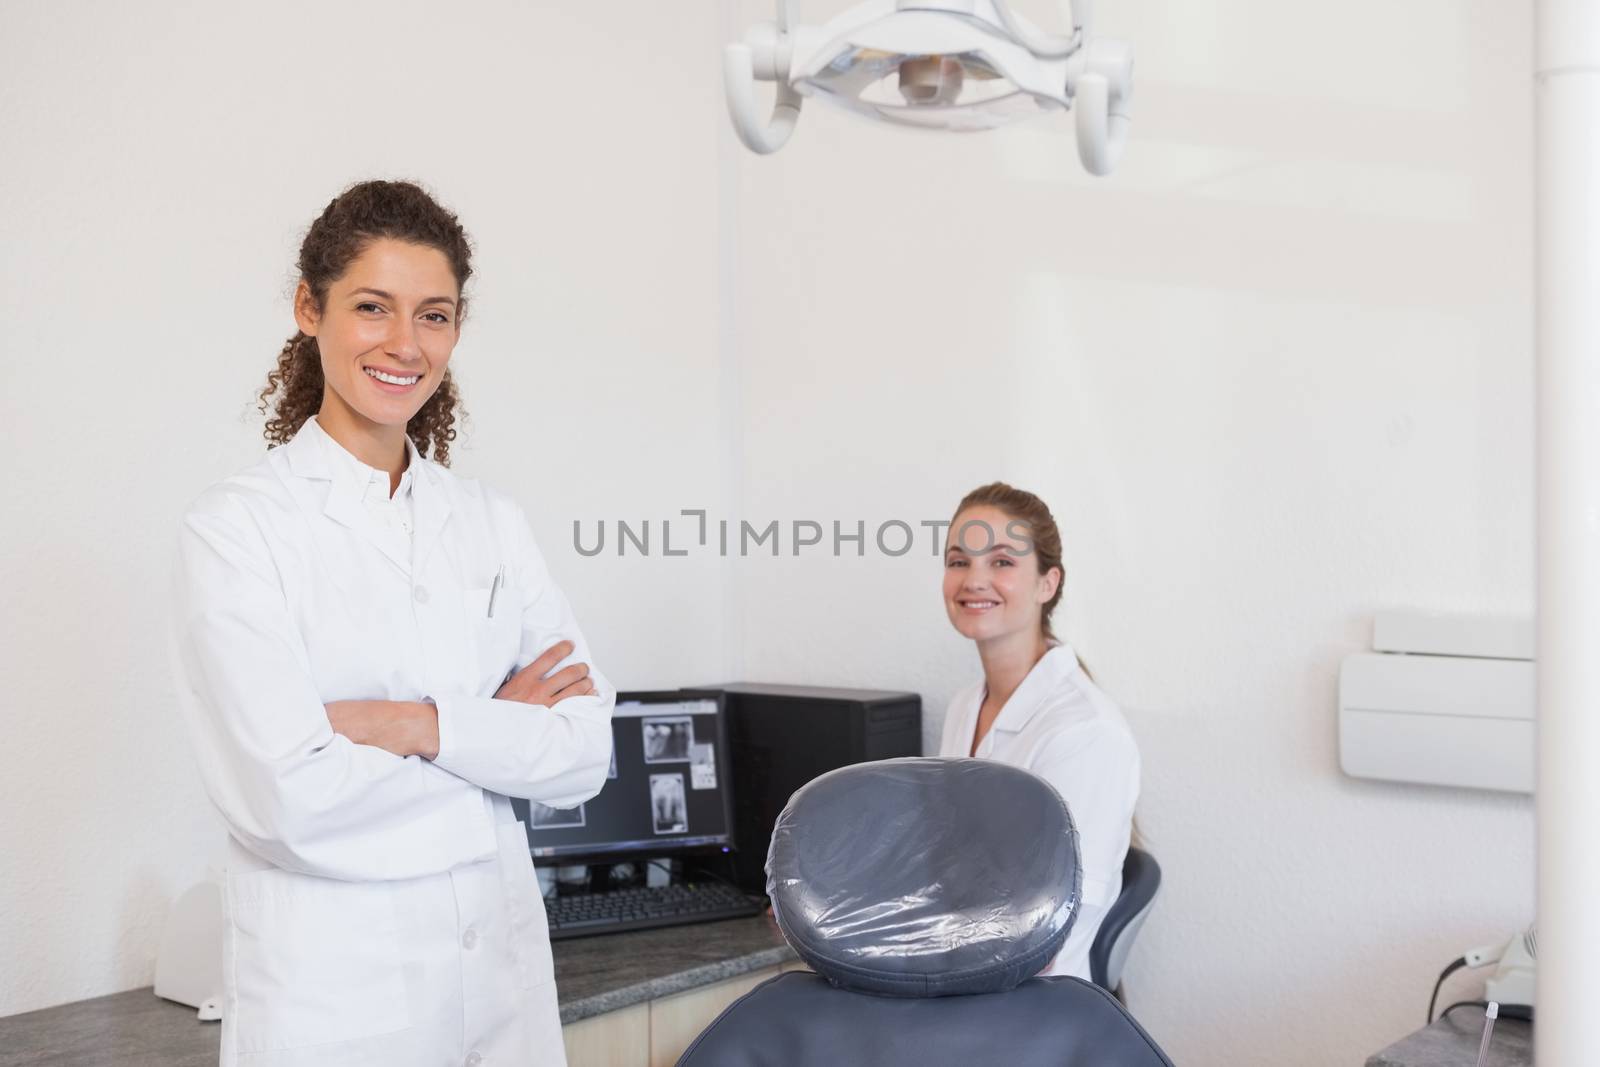 Dentist and assistant smiling at camera by Wavebreakmedia